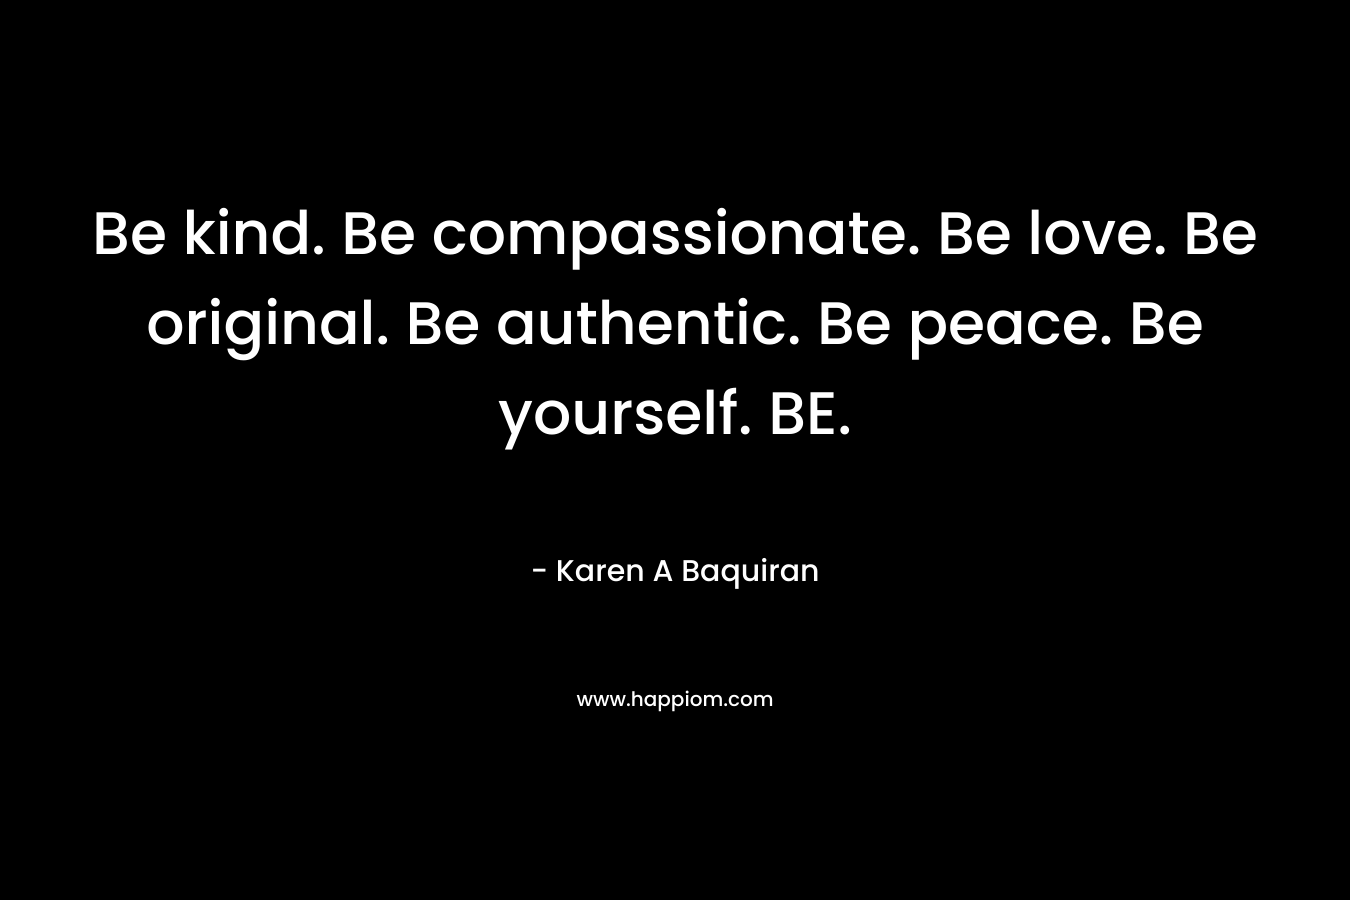 Be kind. Be compassionate. Be love. Be original. Be authentic. Be peace. Be yourself. BE.